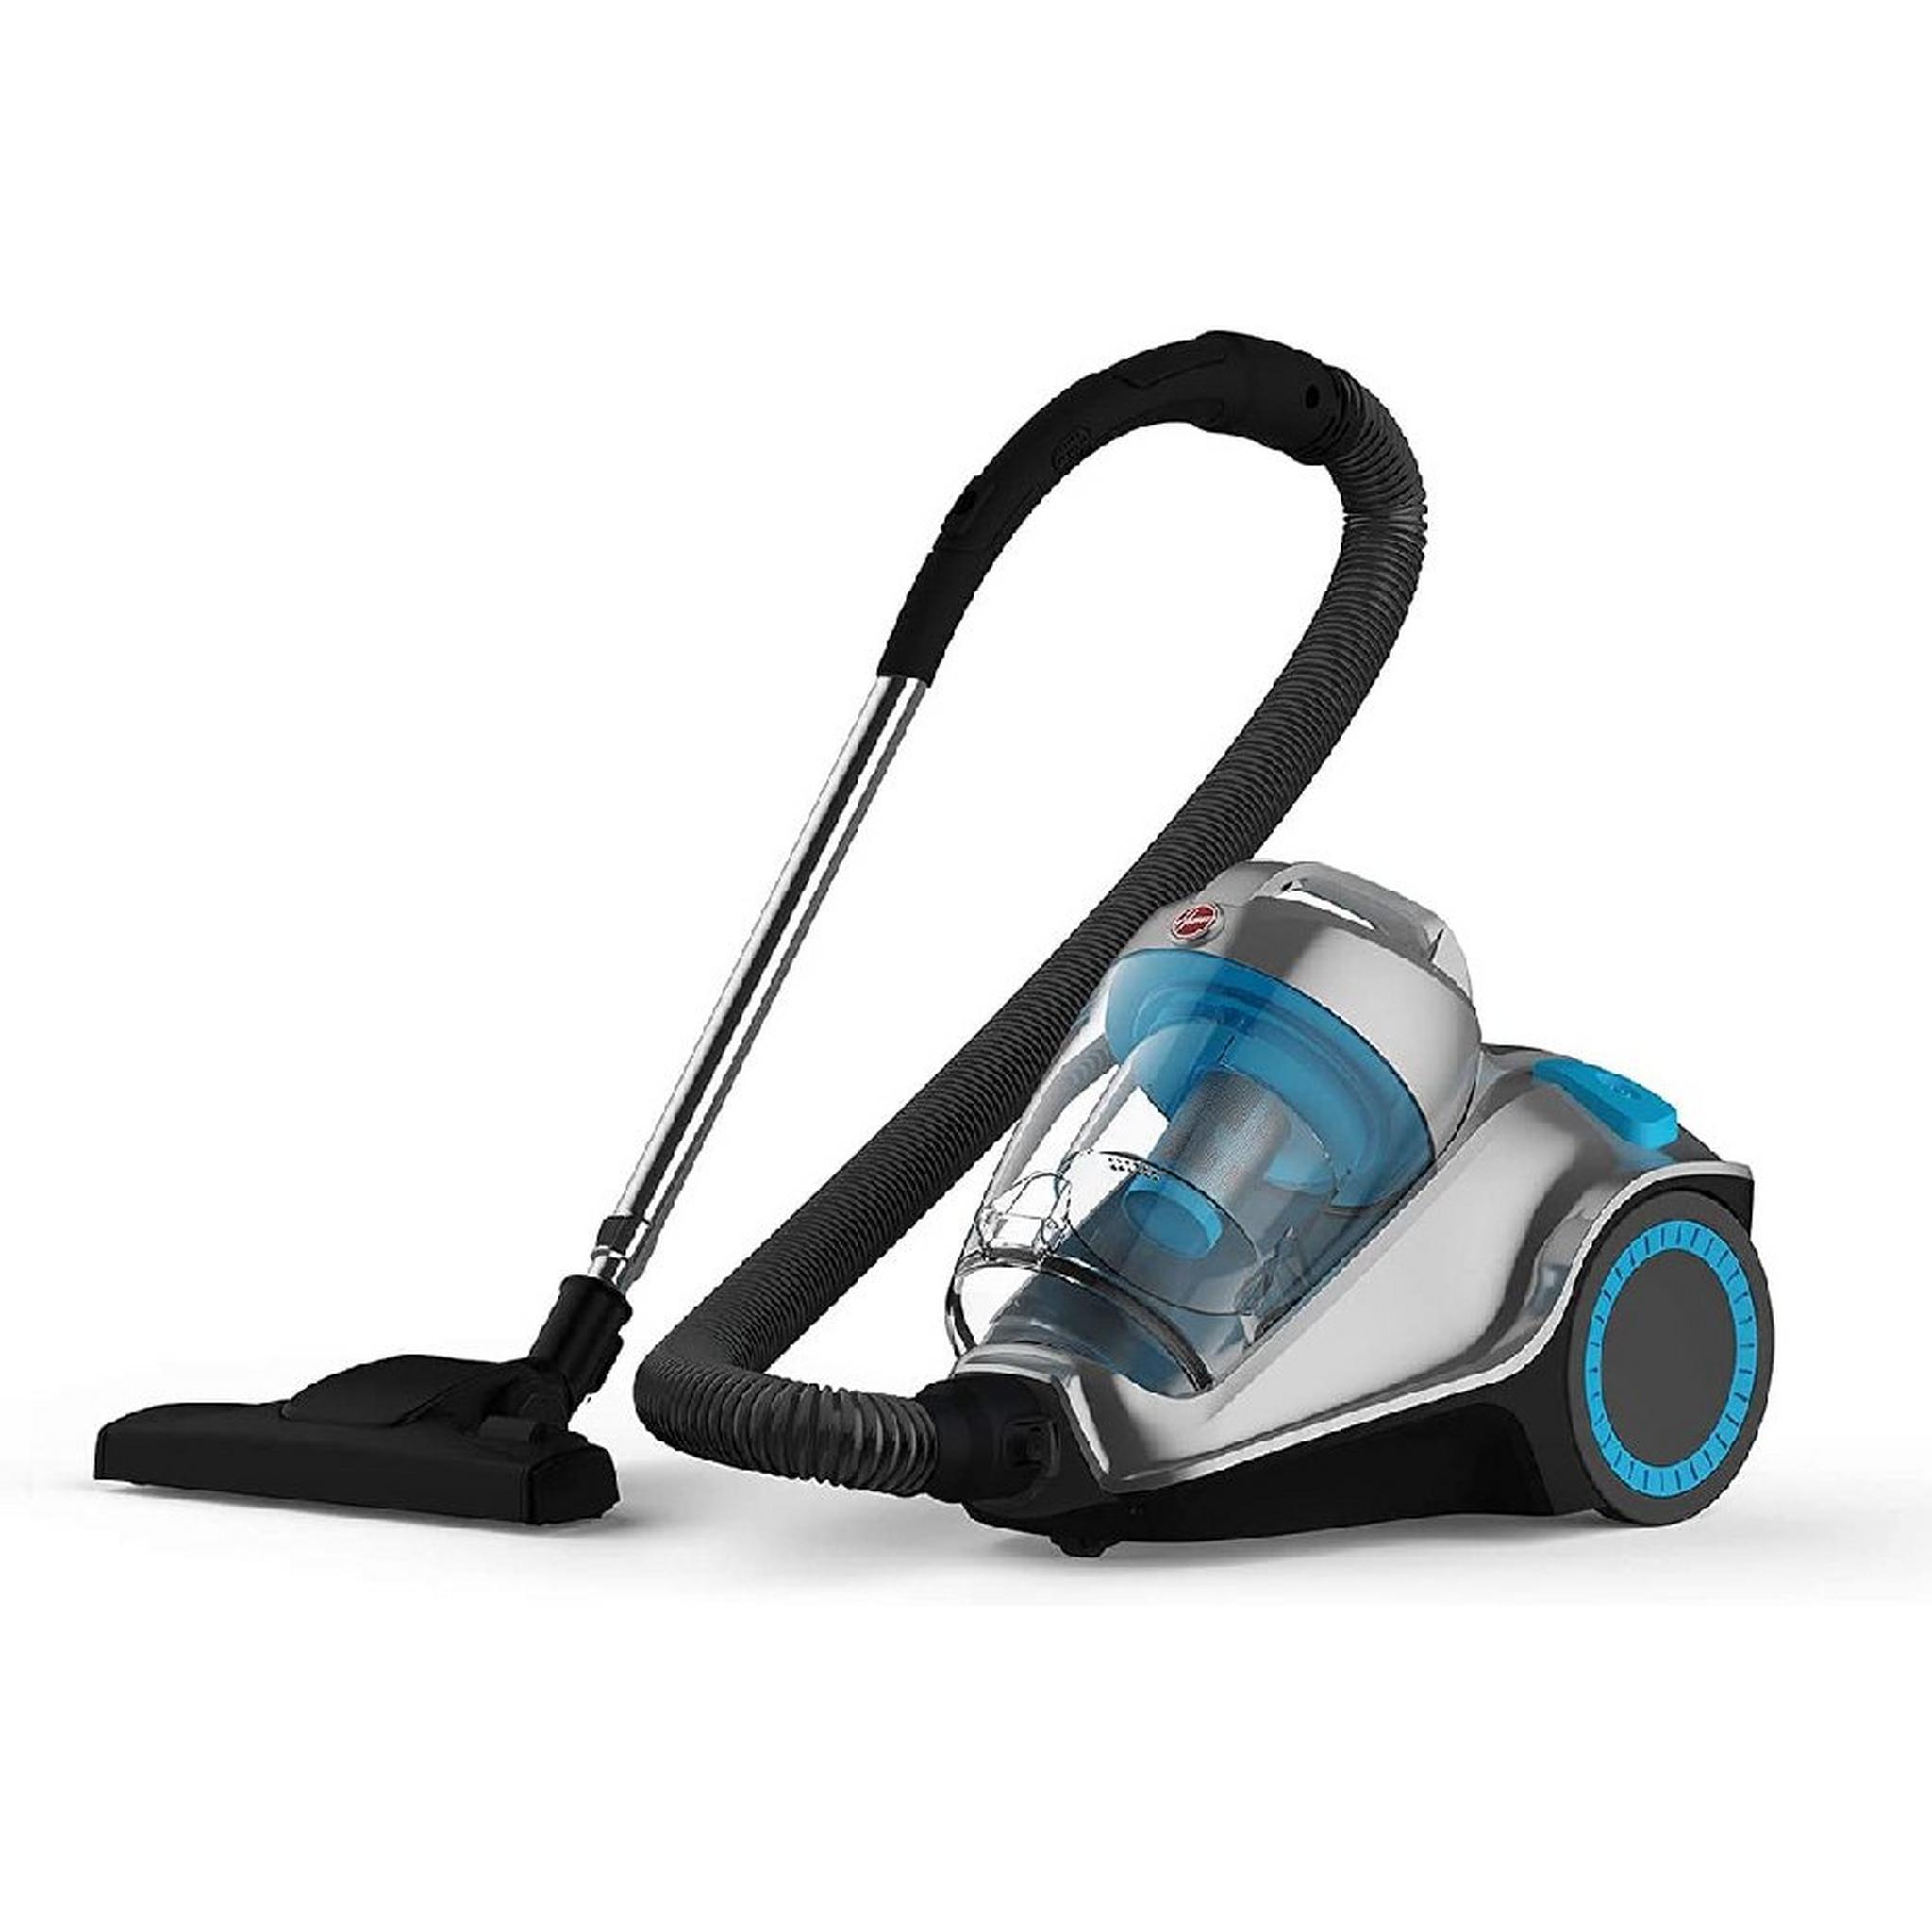 Hoover Power 7 Canister Vacuum Cleaner, 2400W, 4Liters, HC84-P7A-ME - Black/Silver